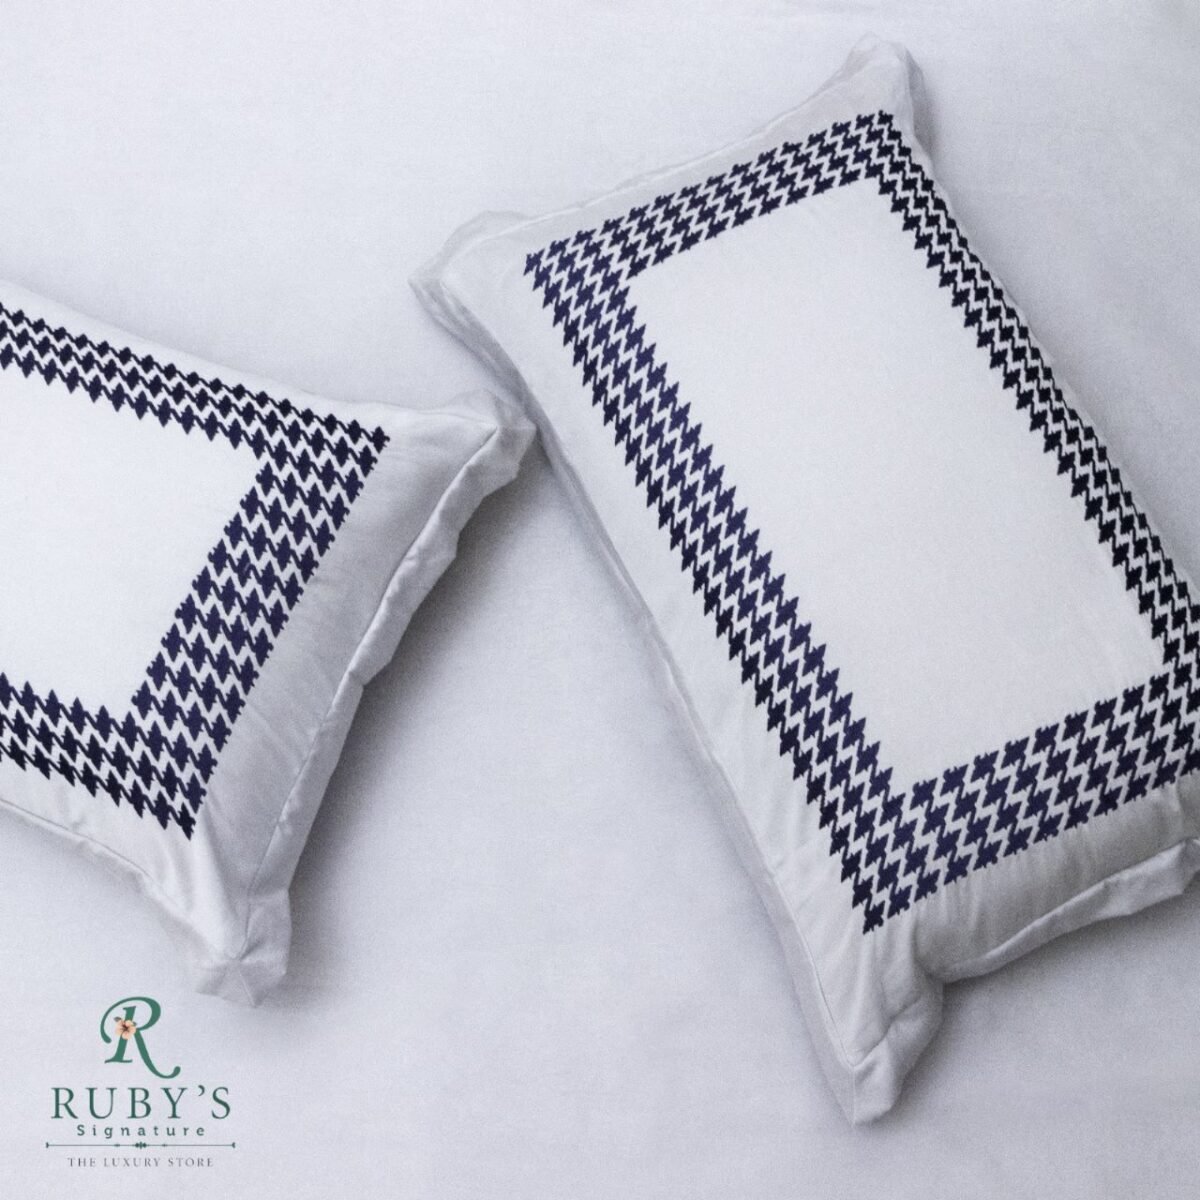 The Houndstooth Prussian Blue Bed sheet